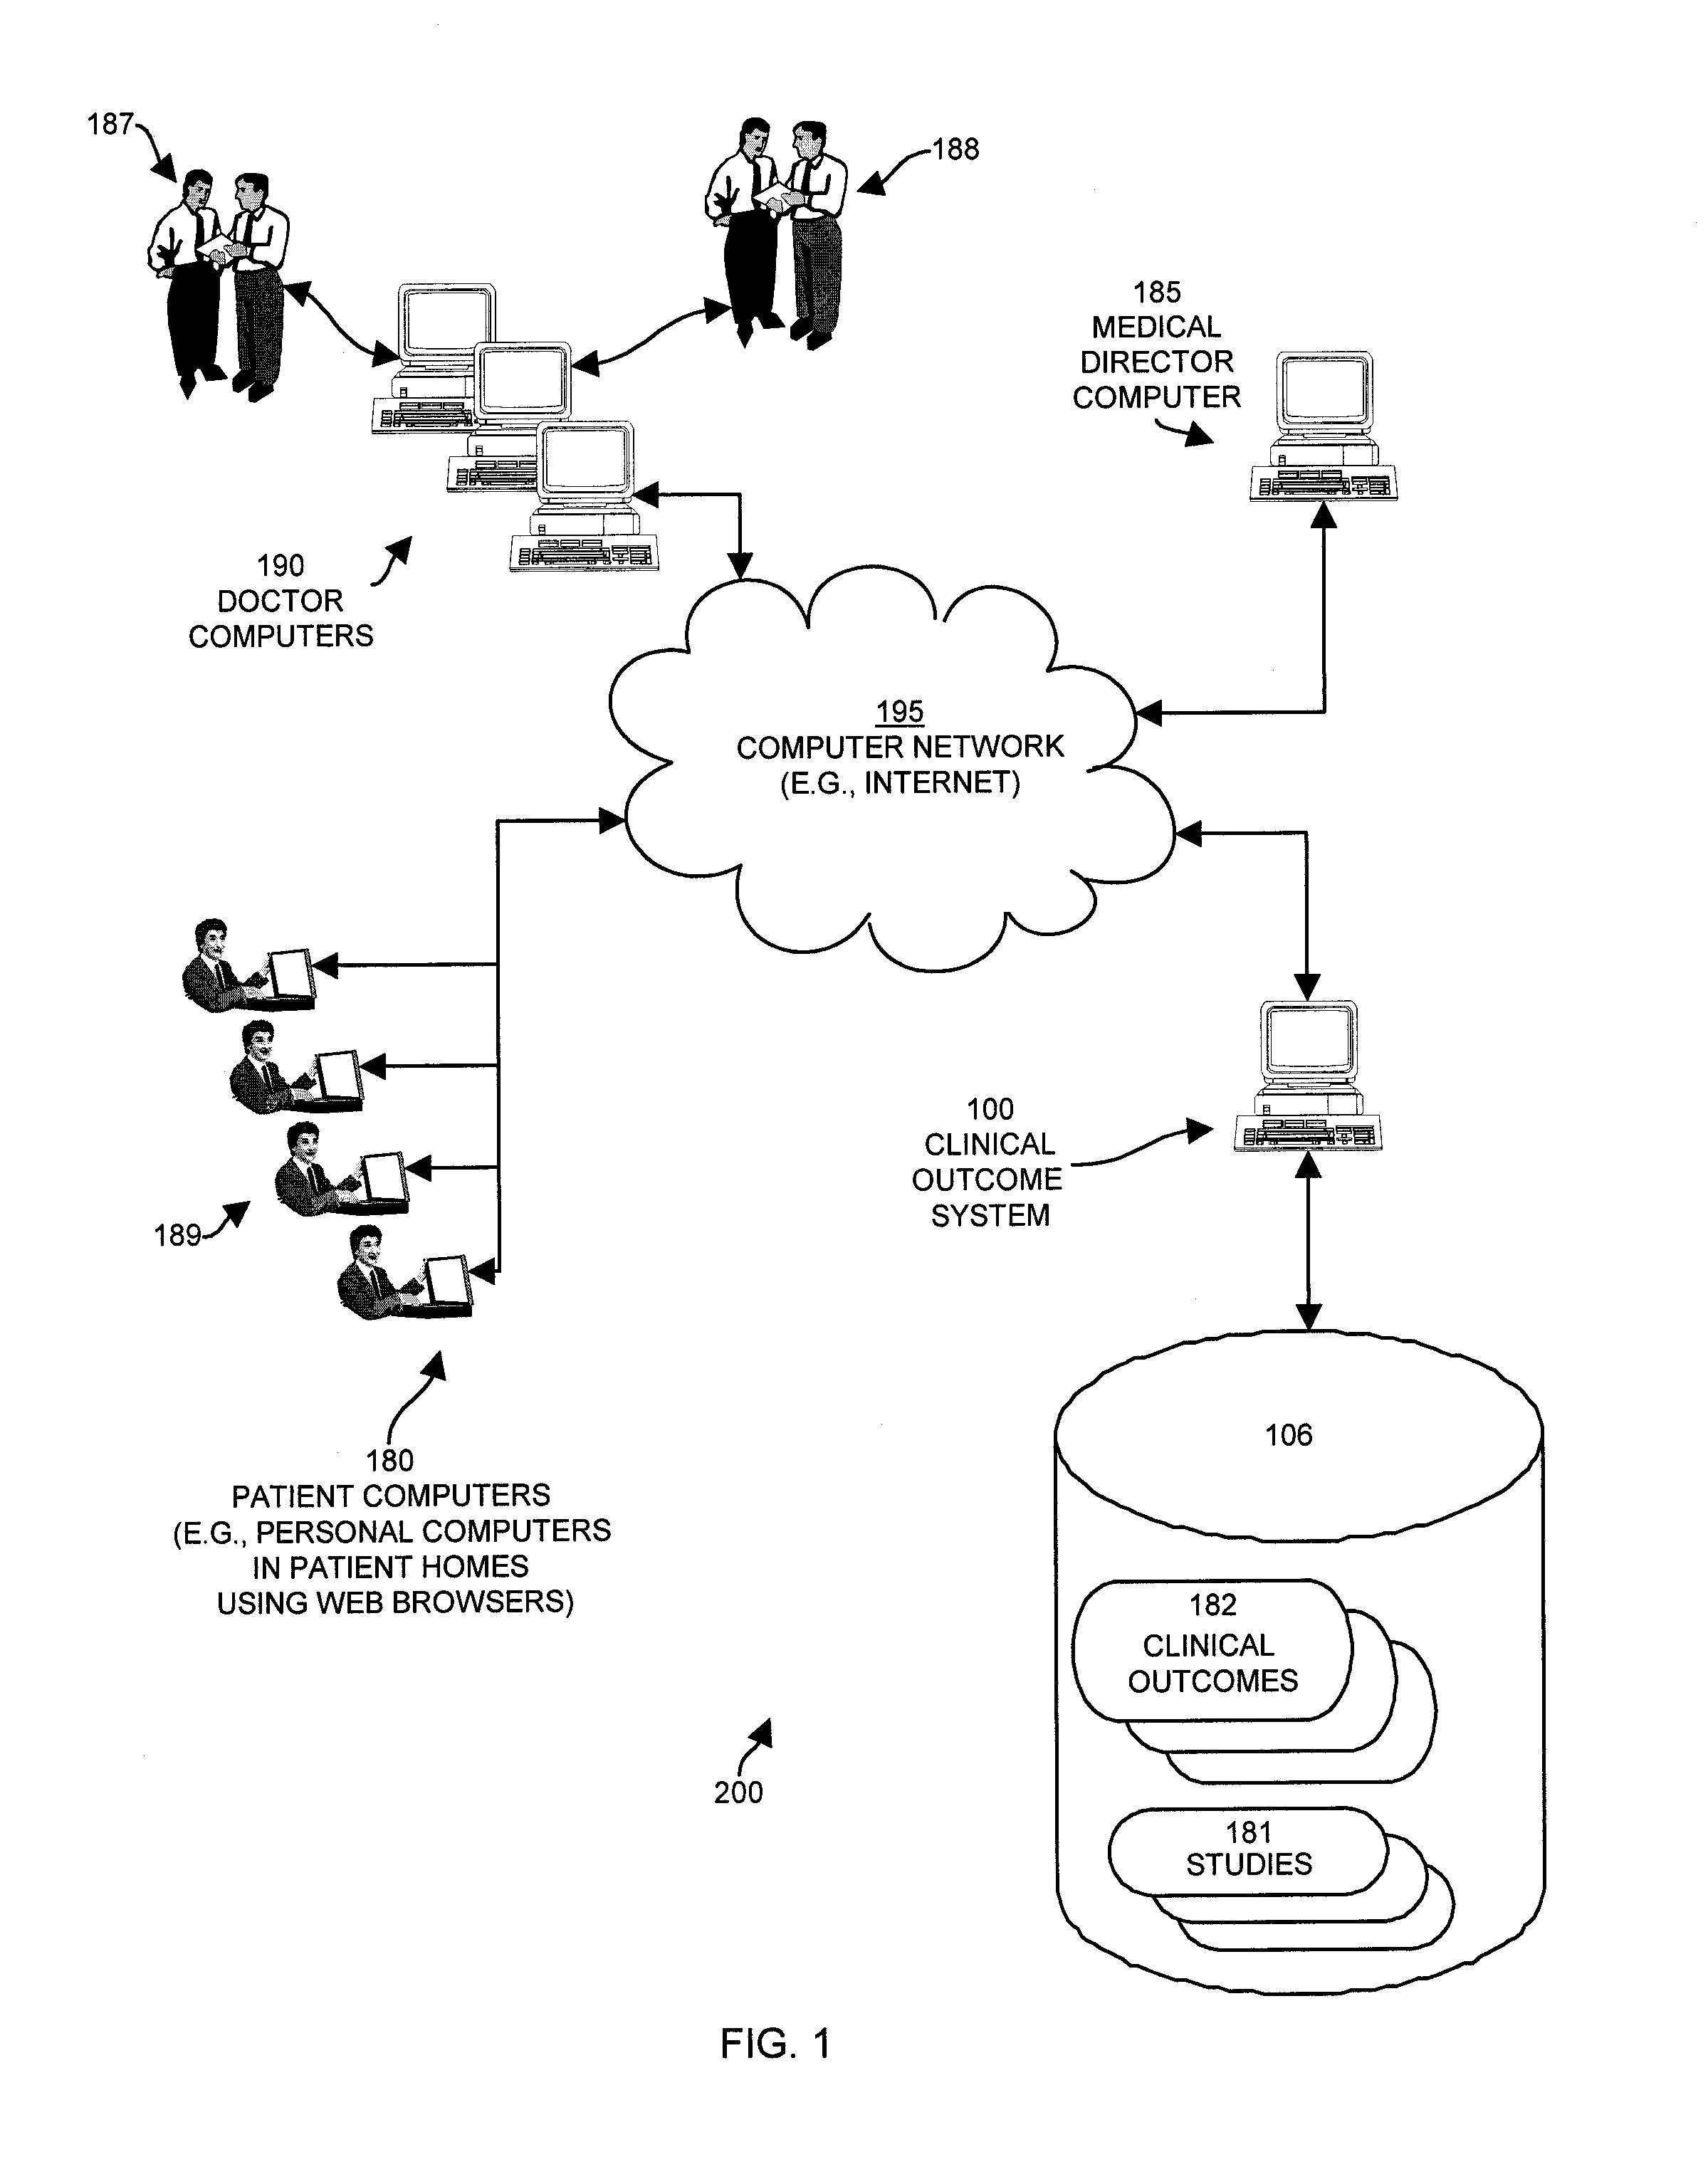 Apparatus and methods for determining and processing medical outcomes